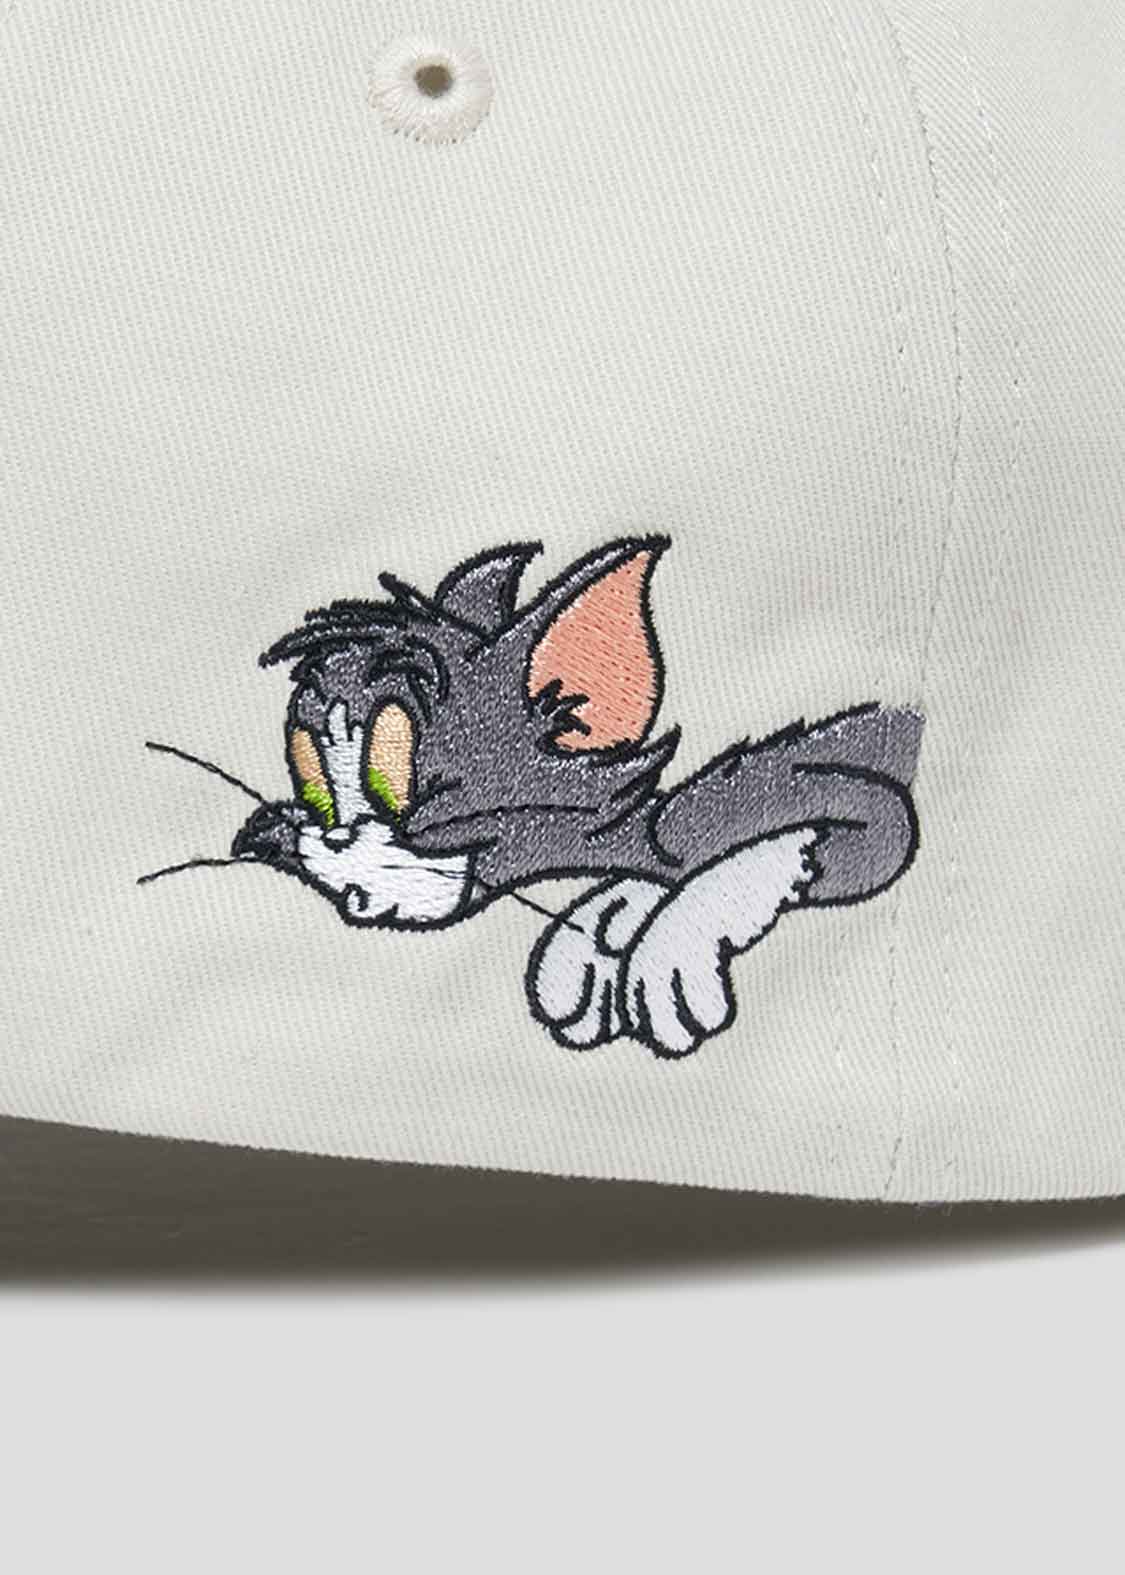 Tom and Jerry  Cap (Tom and Jerry_Laughing Jerry and Tom 2)